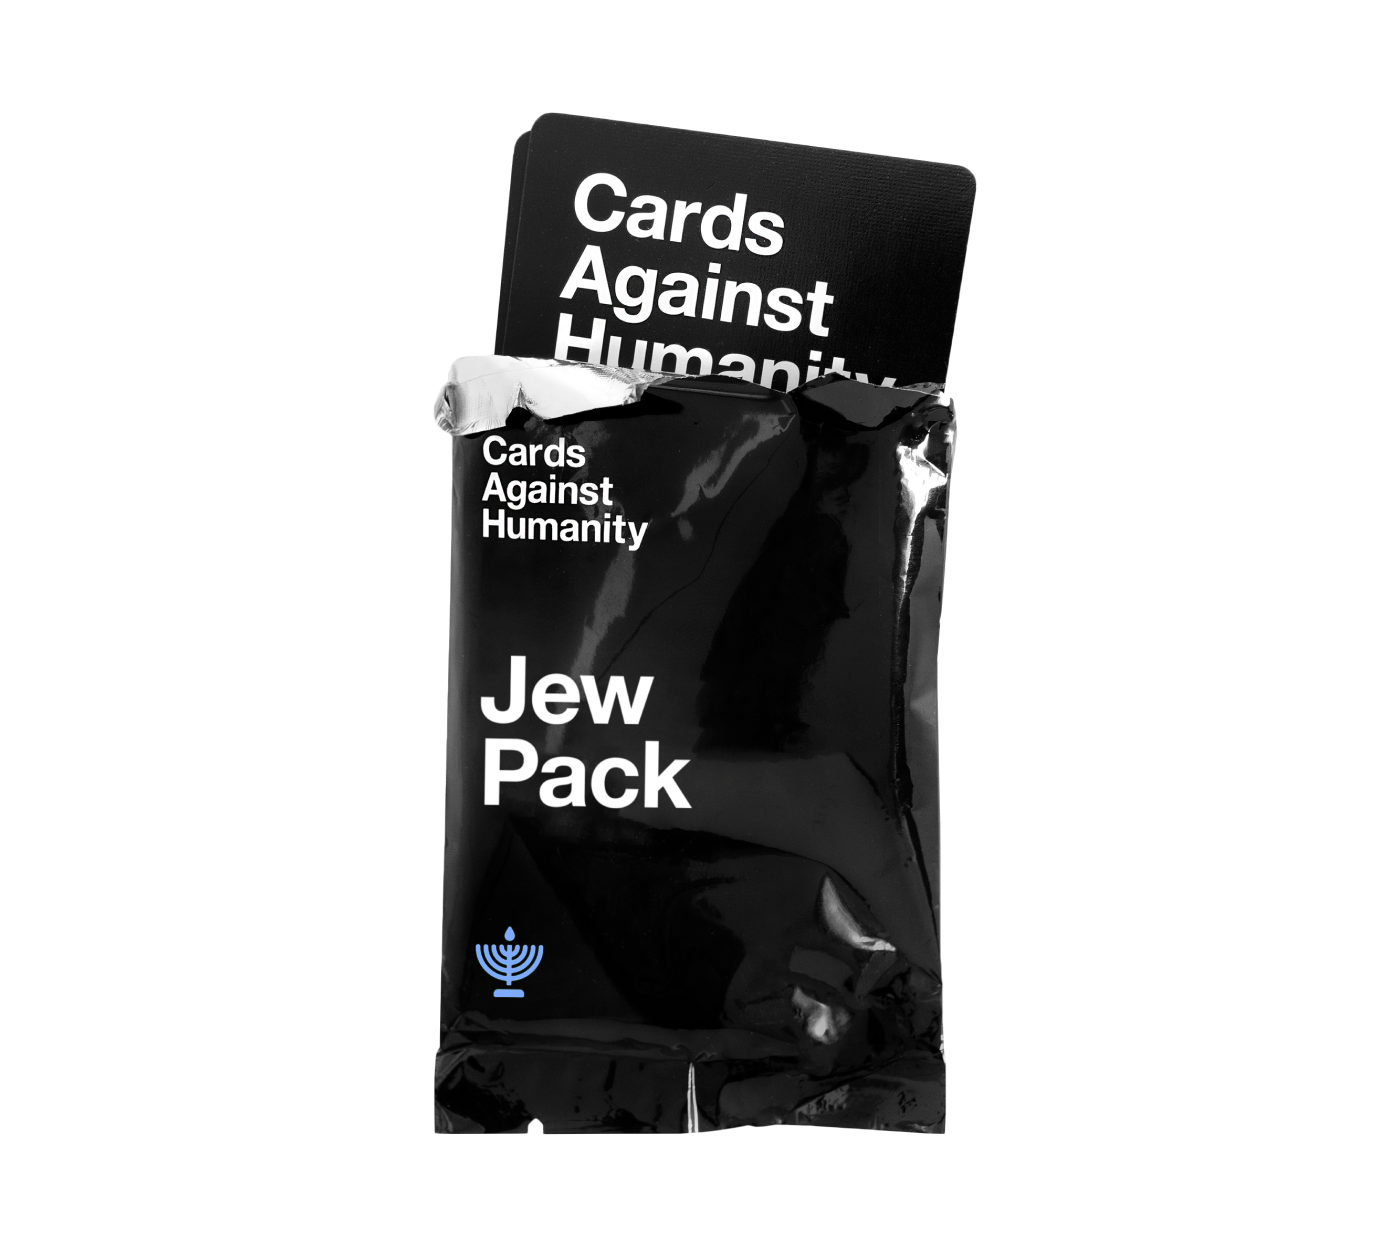 Expansion Set New Great Stocking Stuffer Jew Pack Cards Against Humanity 